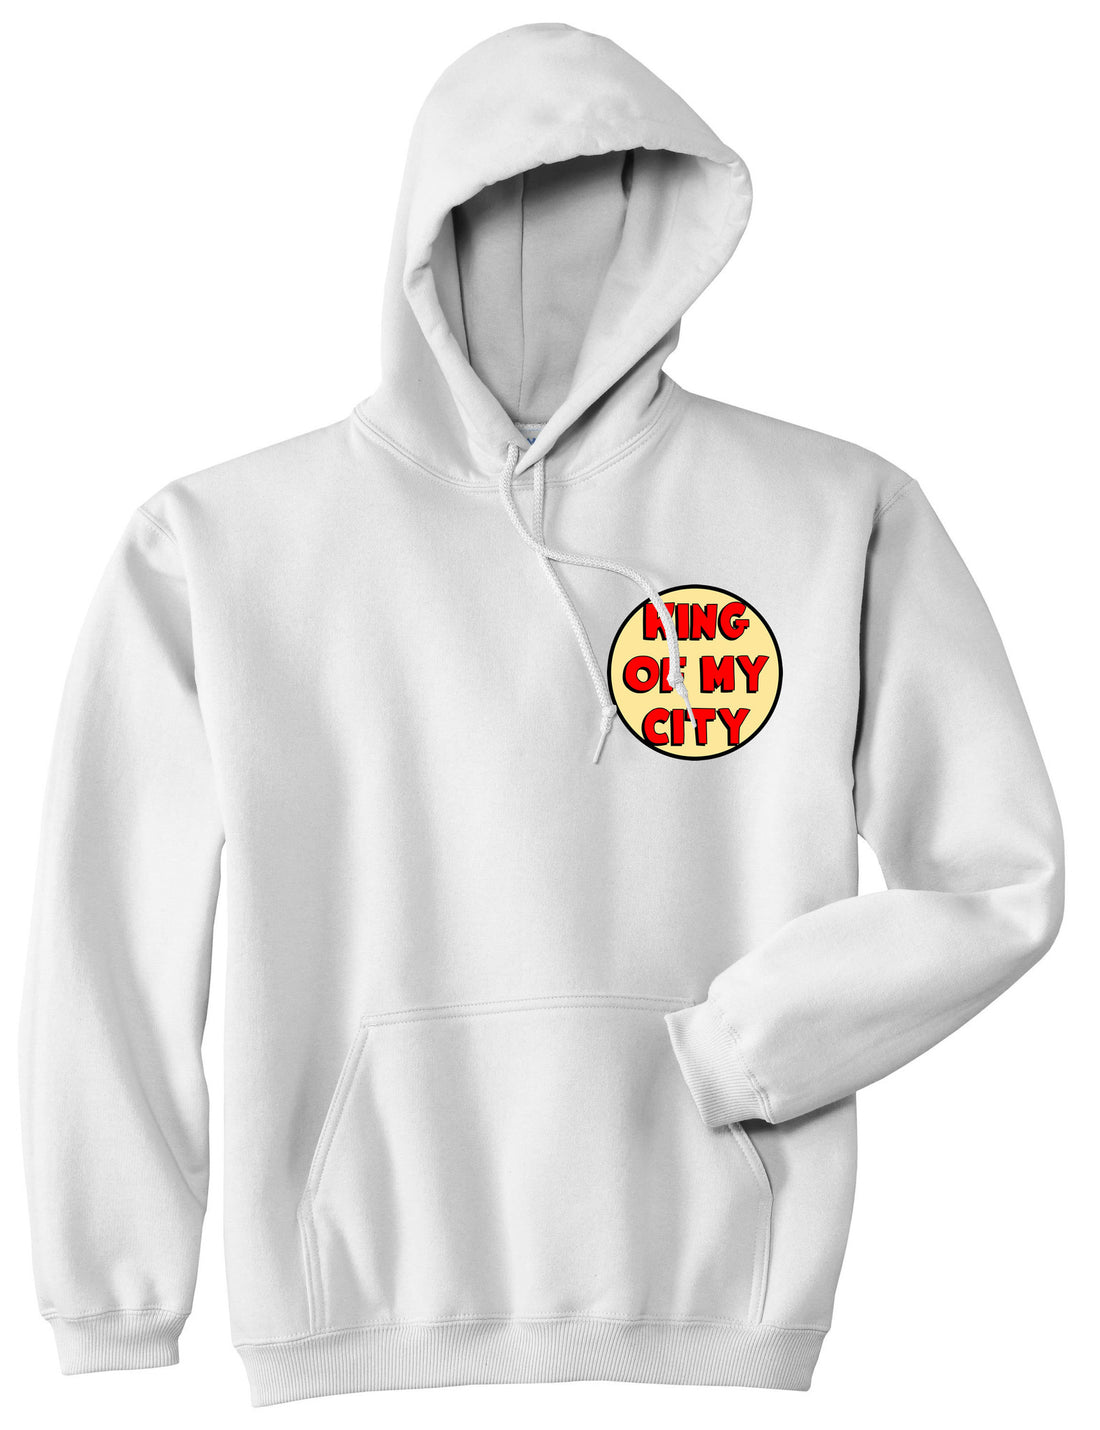 King Of My City Chest Logo Pullover Hoodie Hoody in White by Kings Of NY